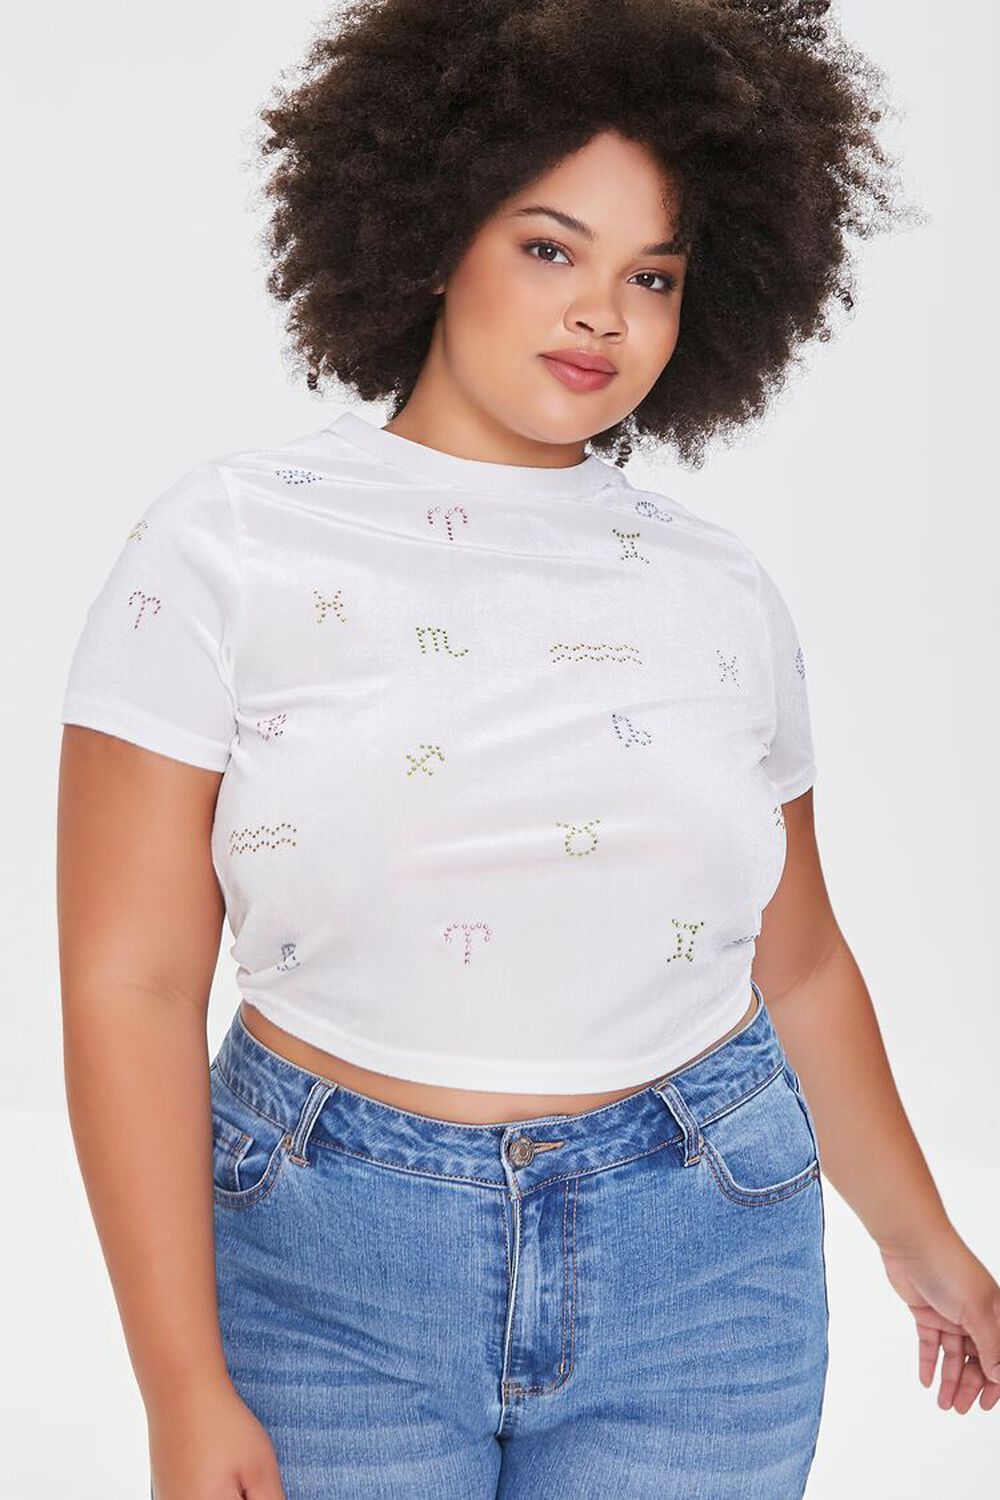 WHITE/MULTI Plus Size Astrology Crop Top, image 1